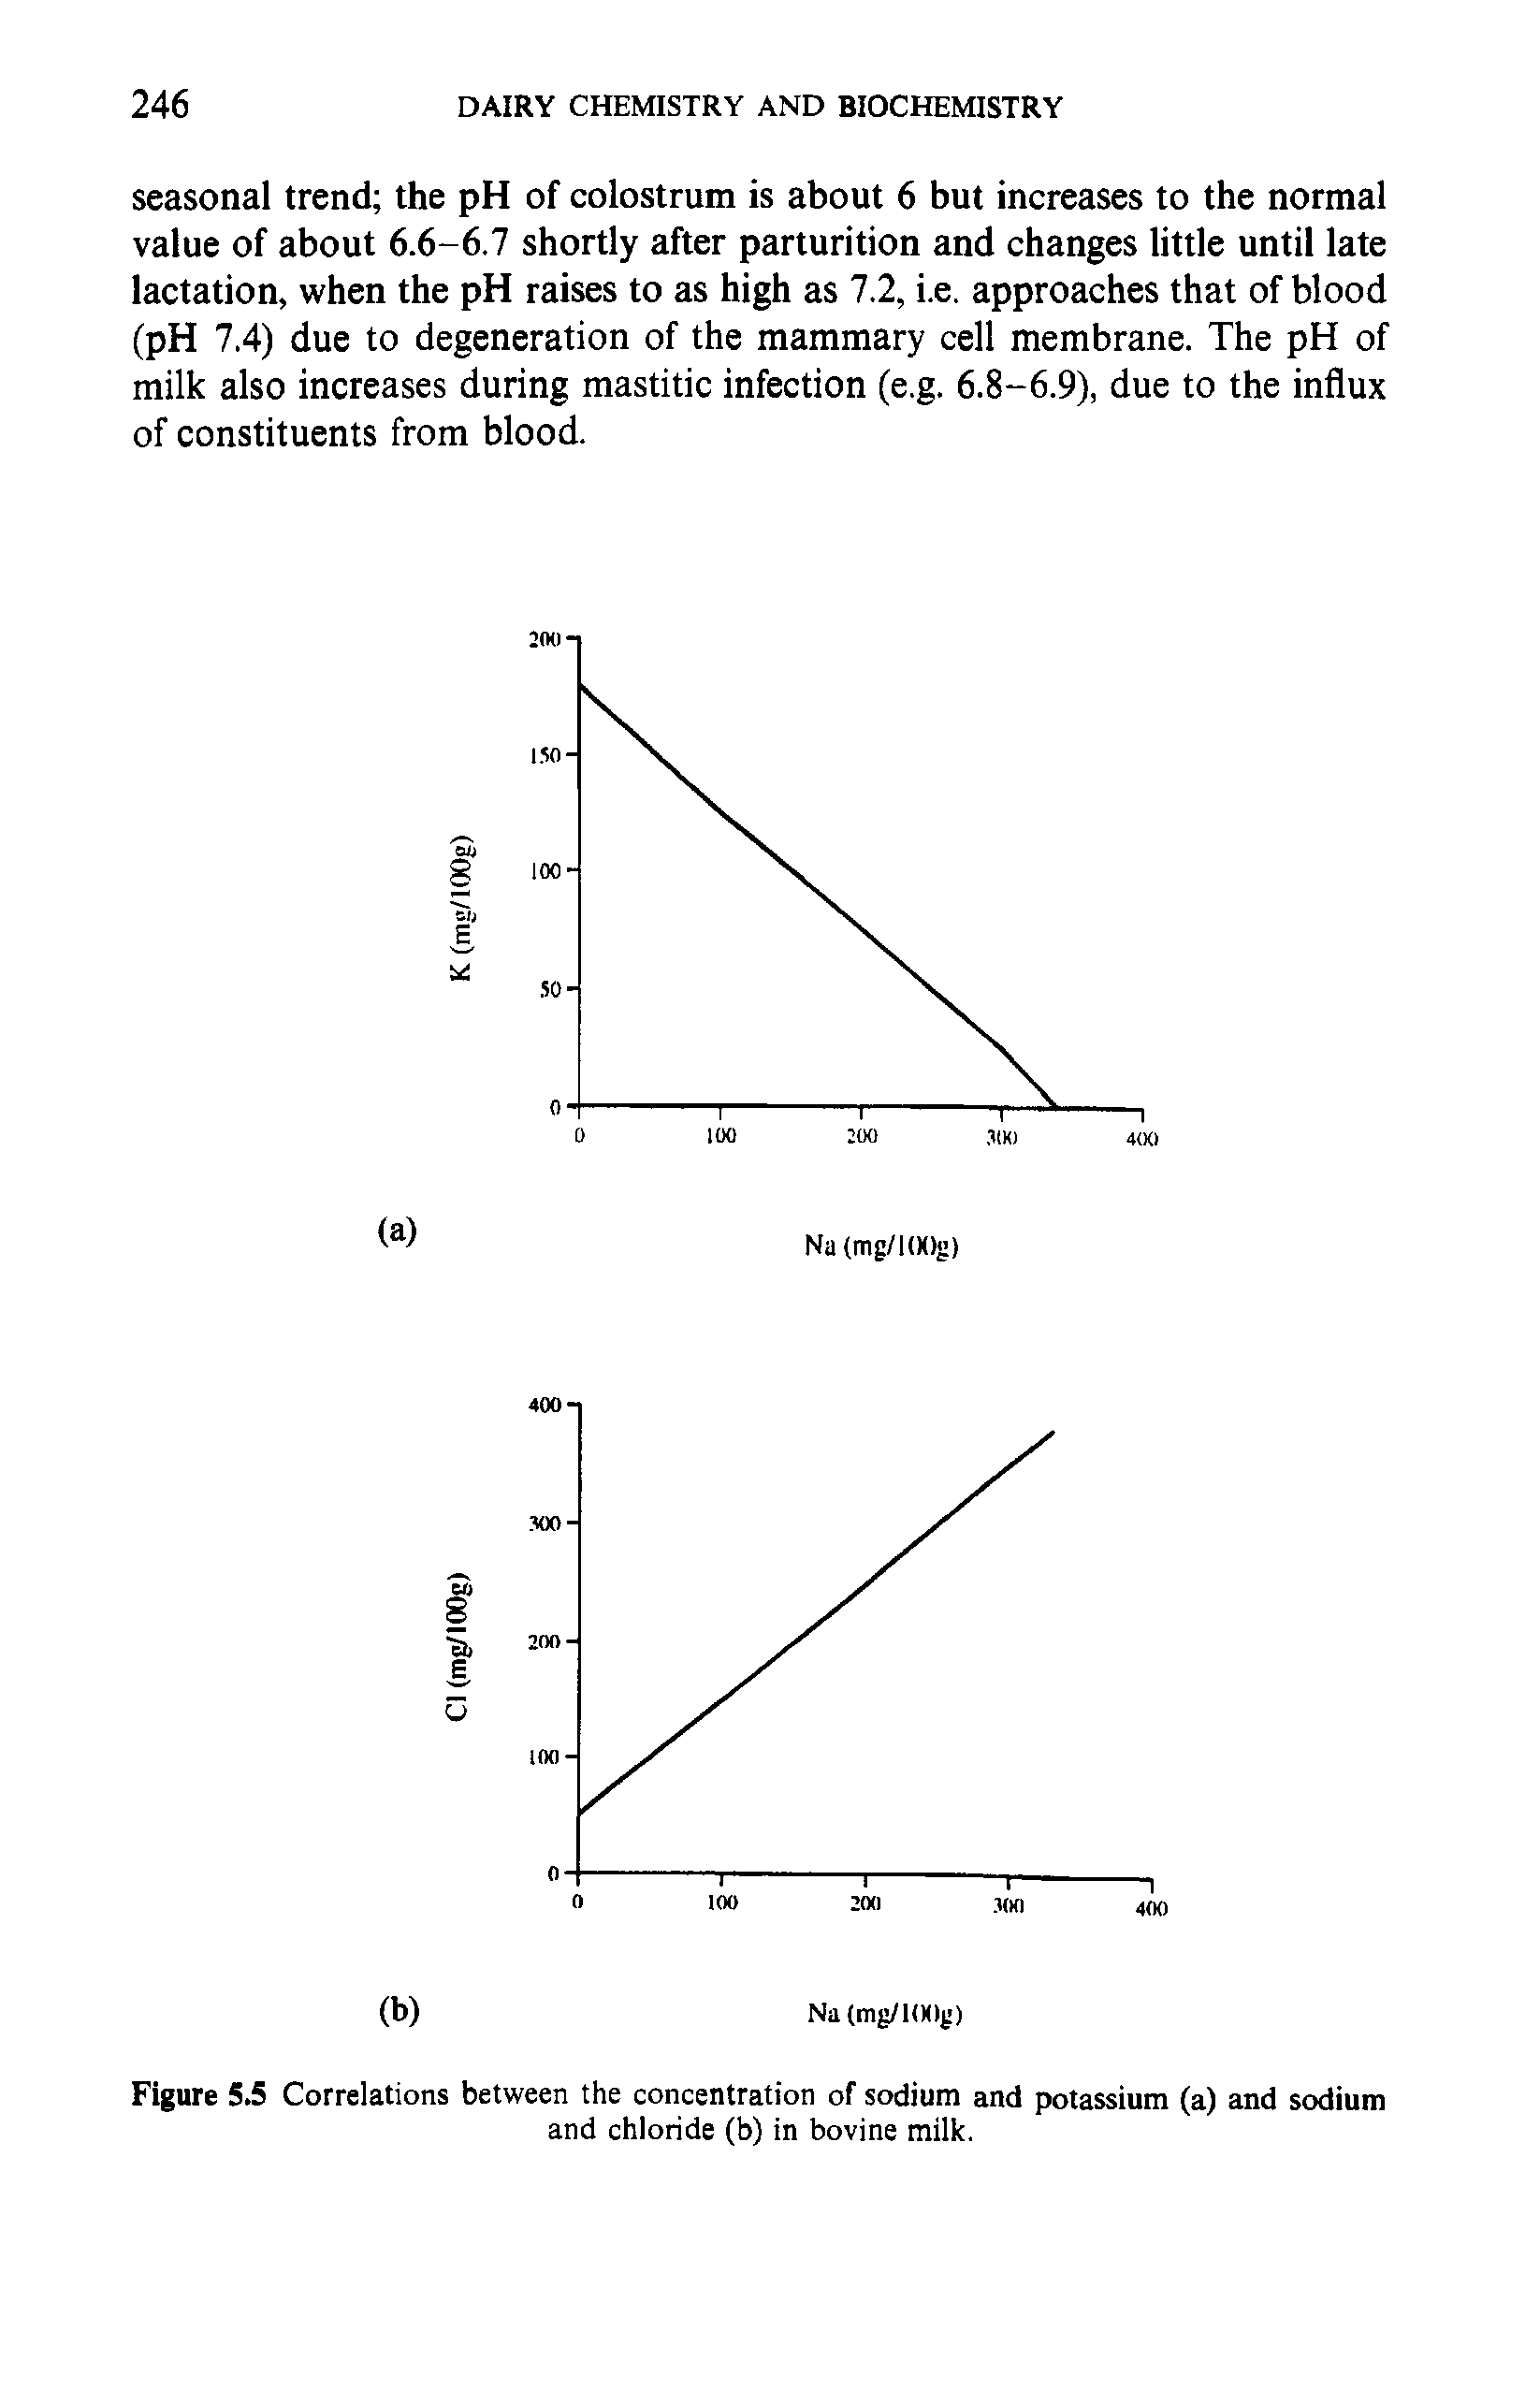 Figure 5.5 Correlations between the concentration of sodium and potassium (a) and sodium and chloride (b) in bovine milk.